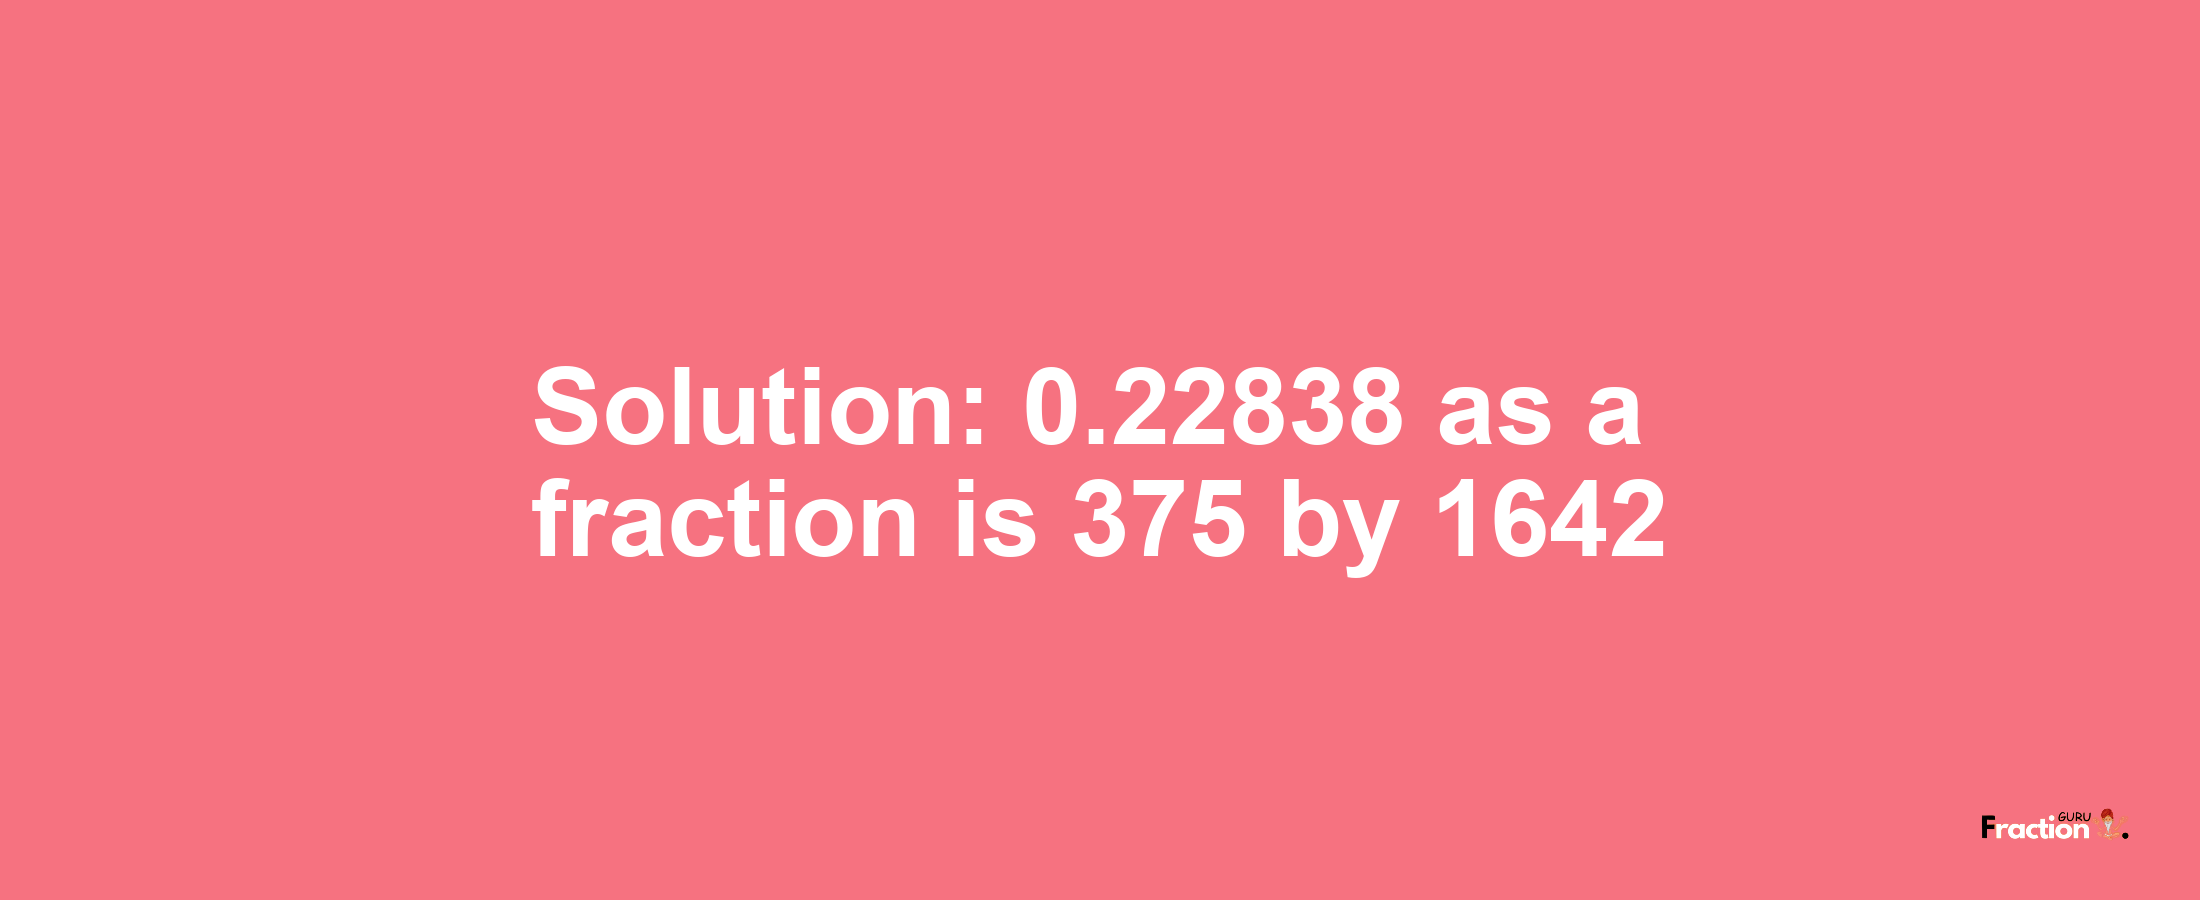 Solution:0.22838 as a fraction is 375/1642